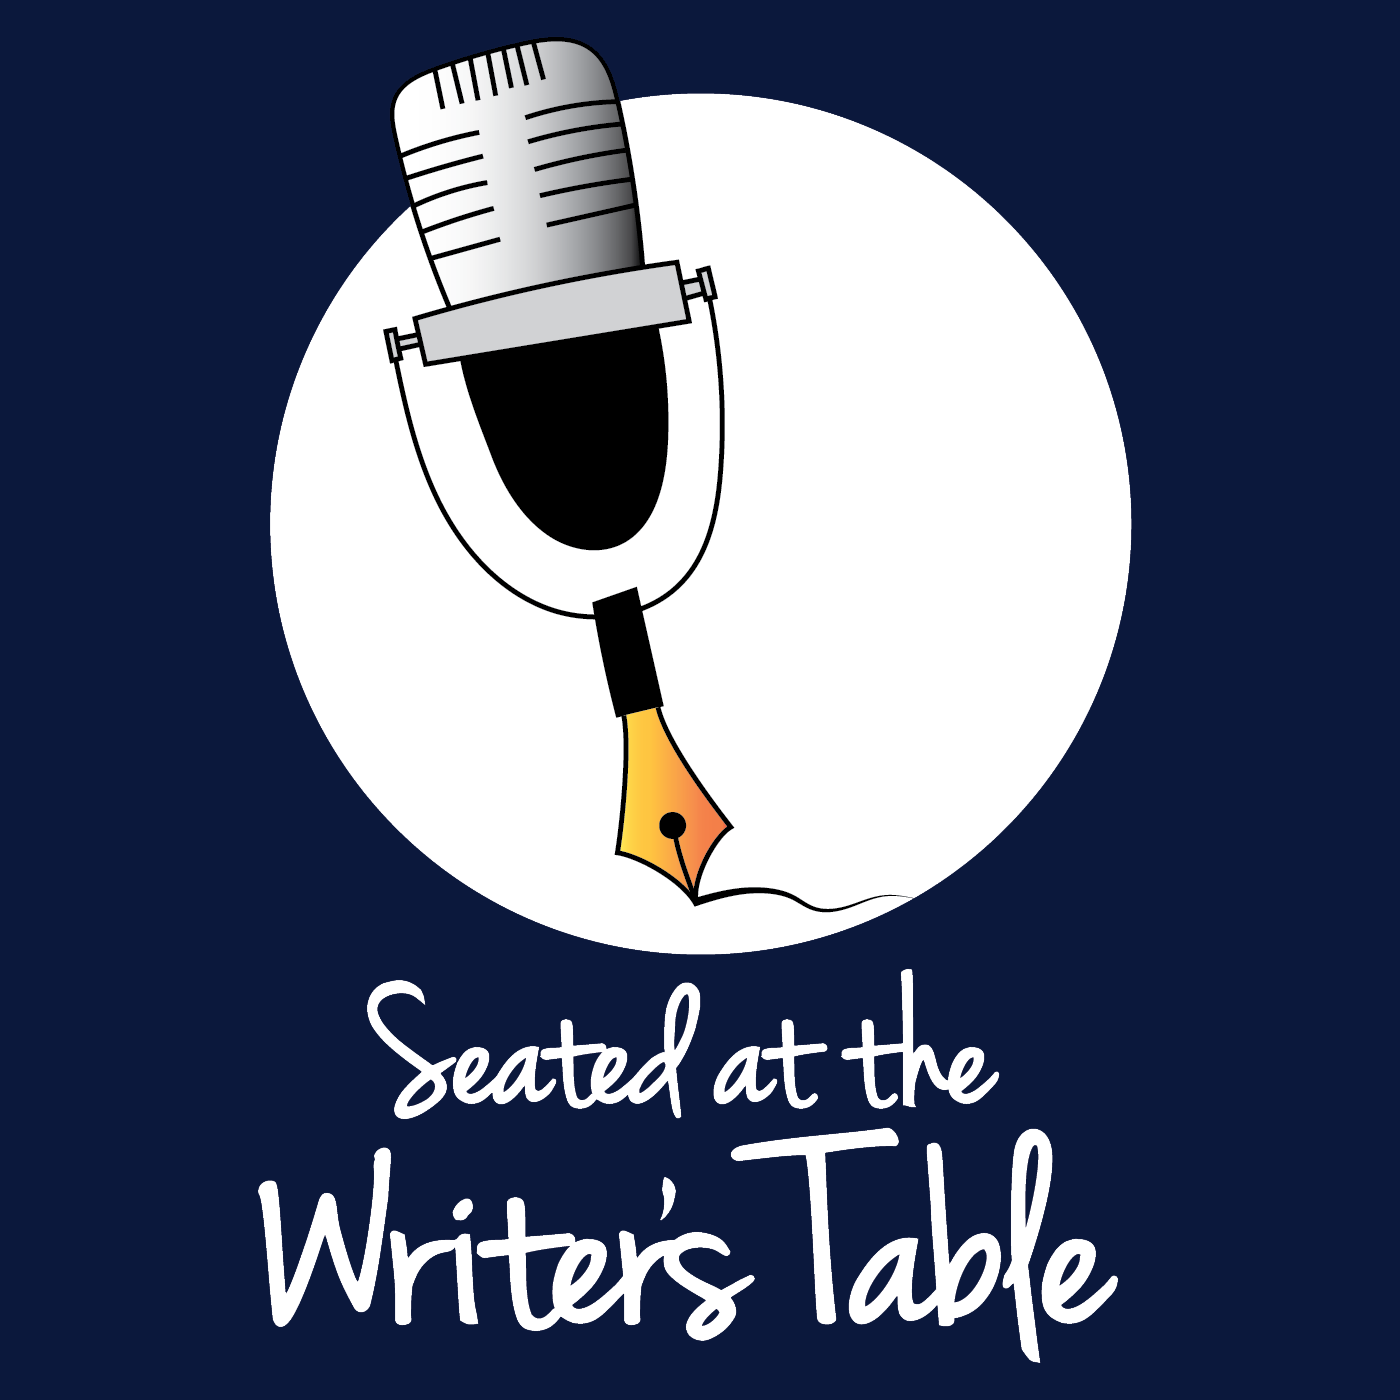 Hosted by Phil Giangrande, “Seated At The Writer’s Table” is a #podcast for those who geek out over writing. Featuring diverse writers & industry professionals.